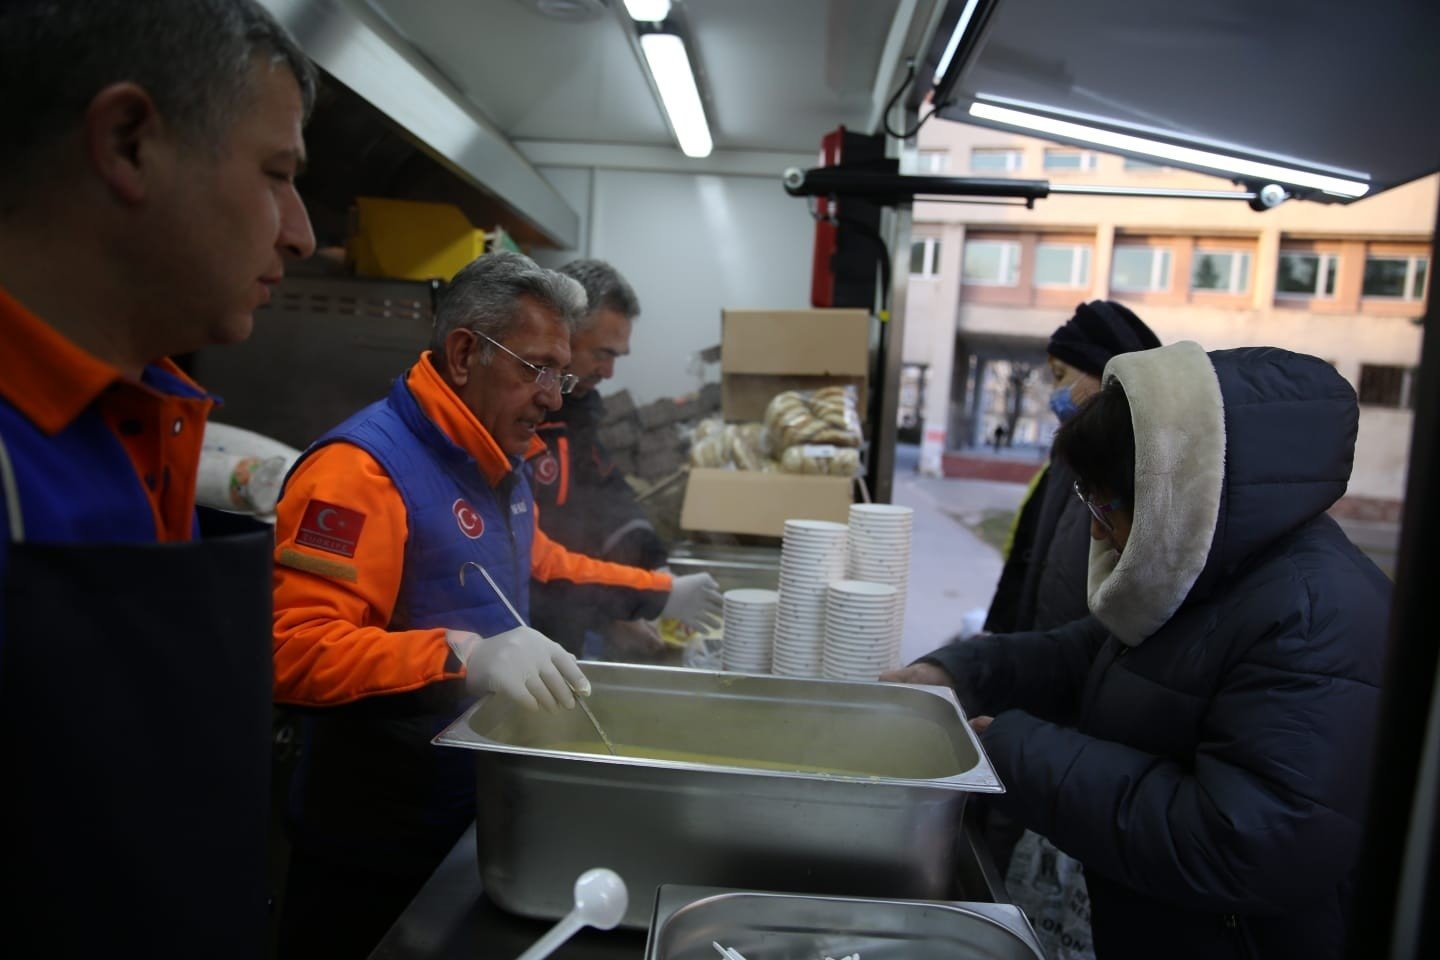 AFAD workers distribute warm food to locals in need in Lviv, Ukraine, March 20, 2022. (IHA Photo)